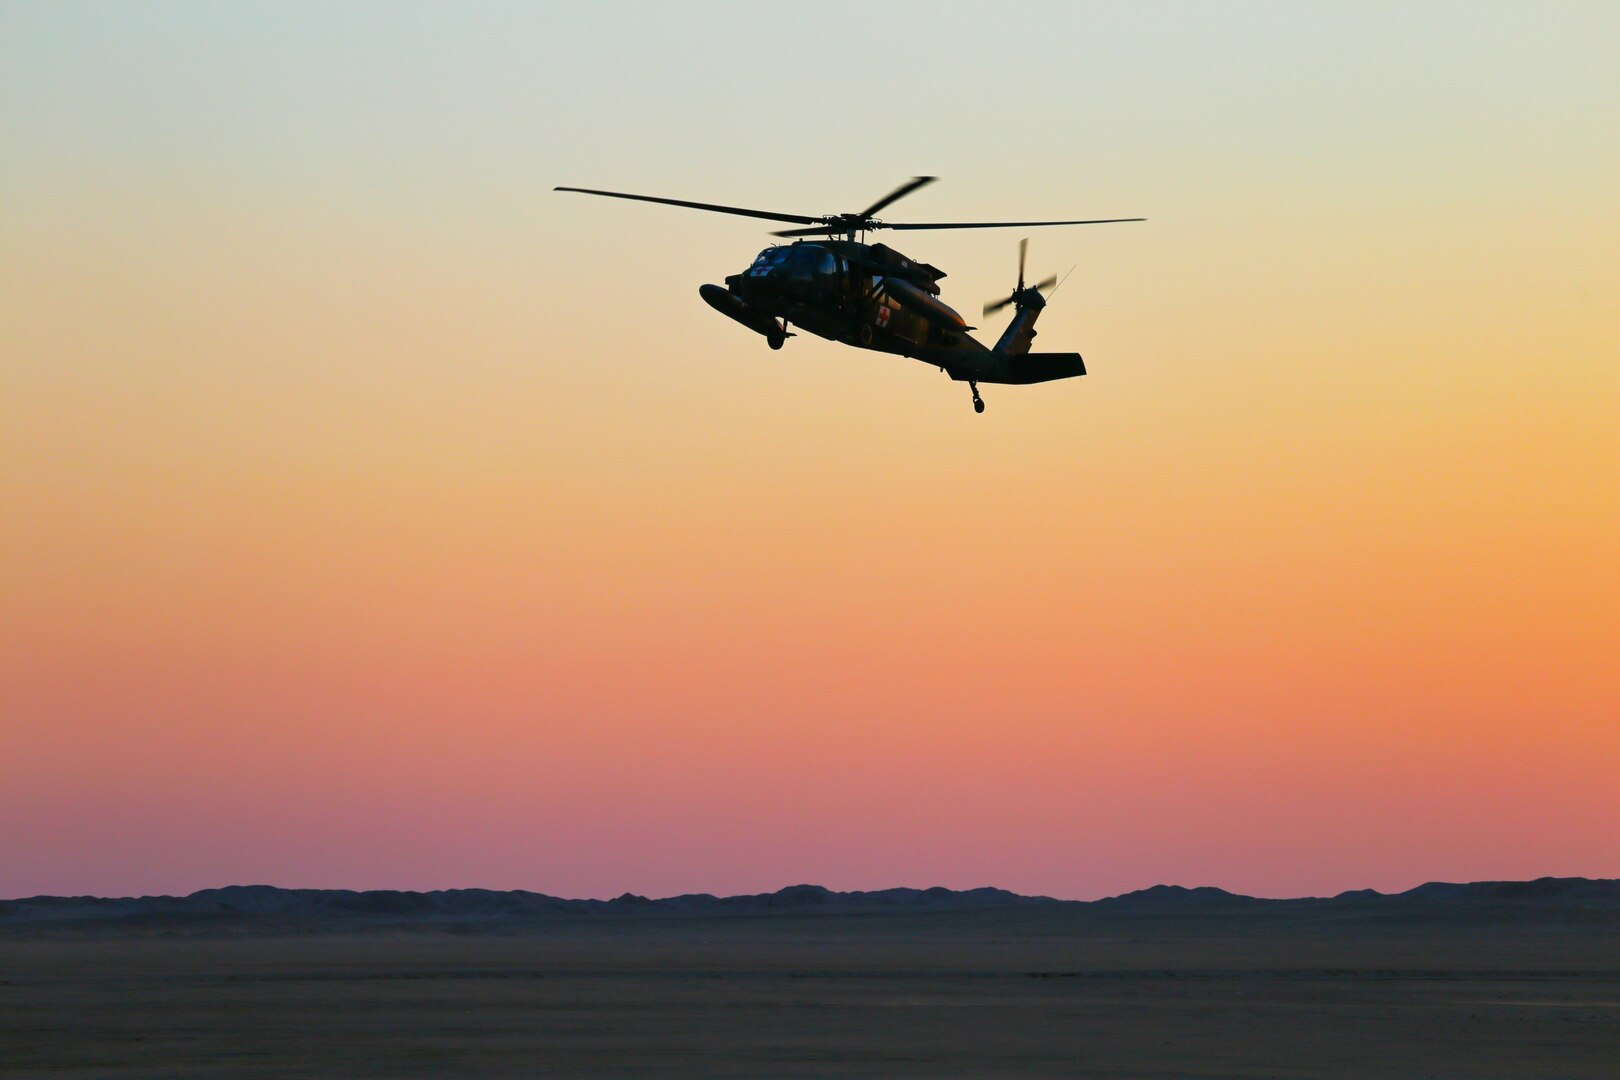 A helicopter flies above the desert.